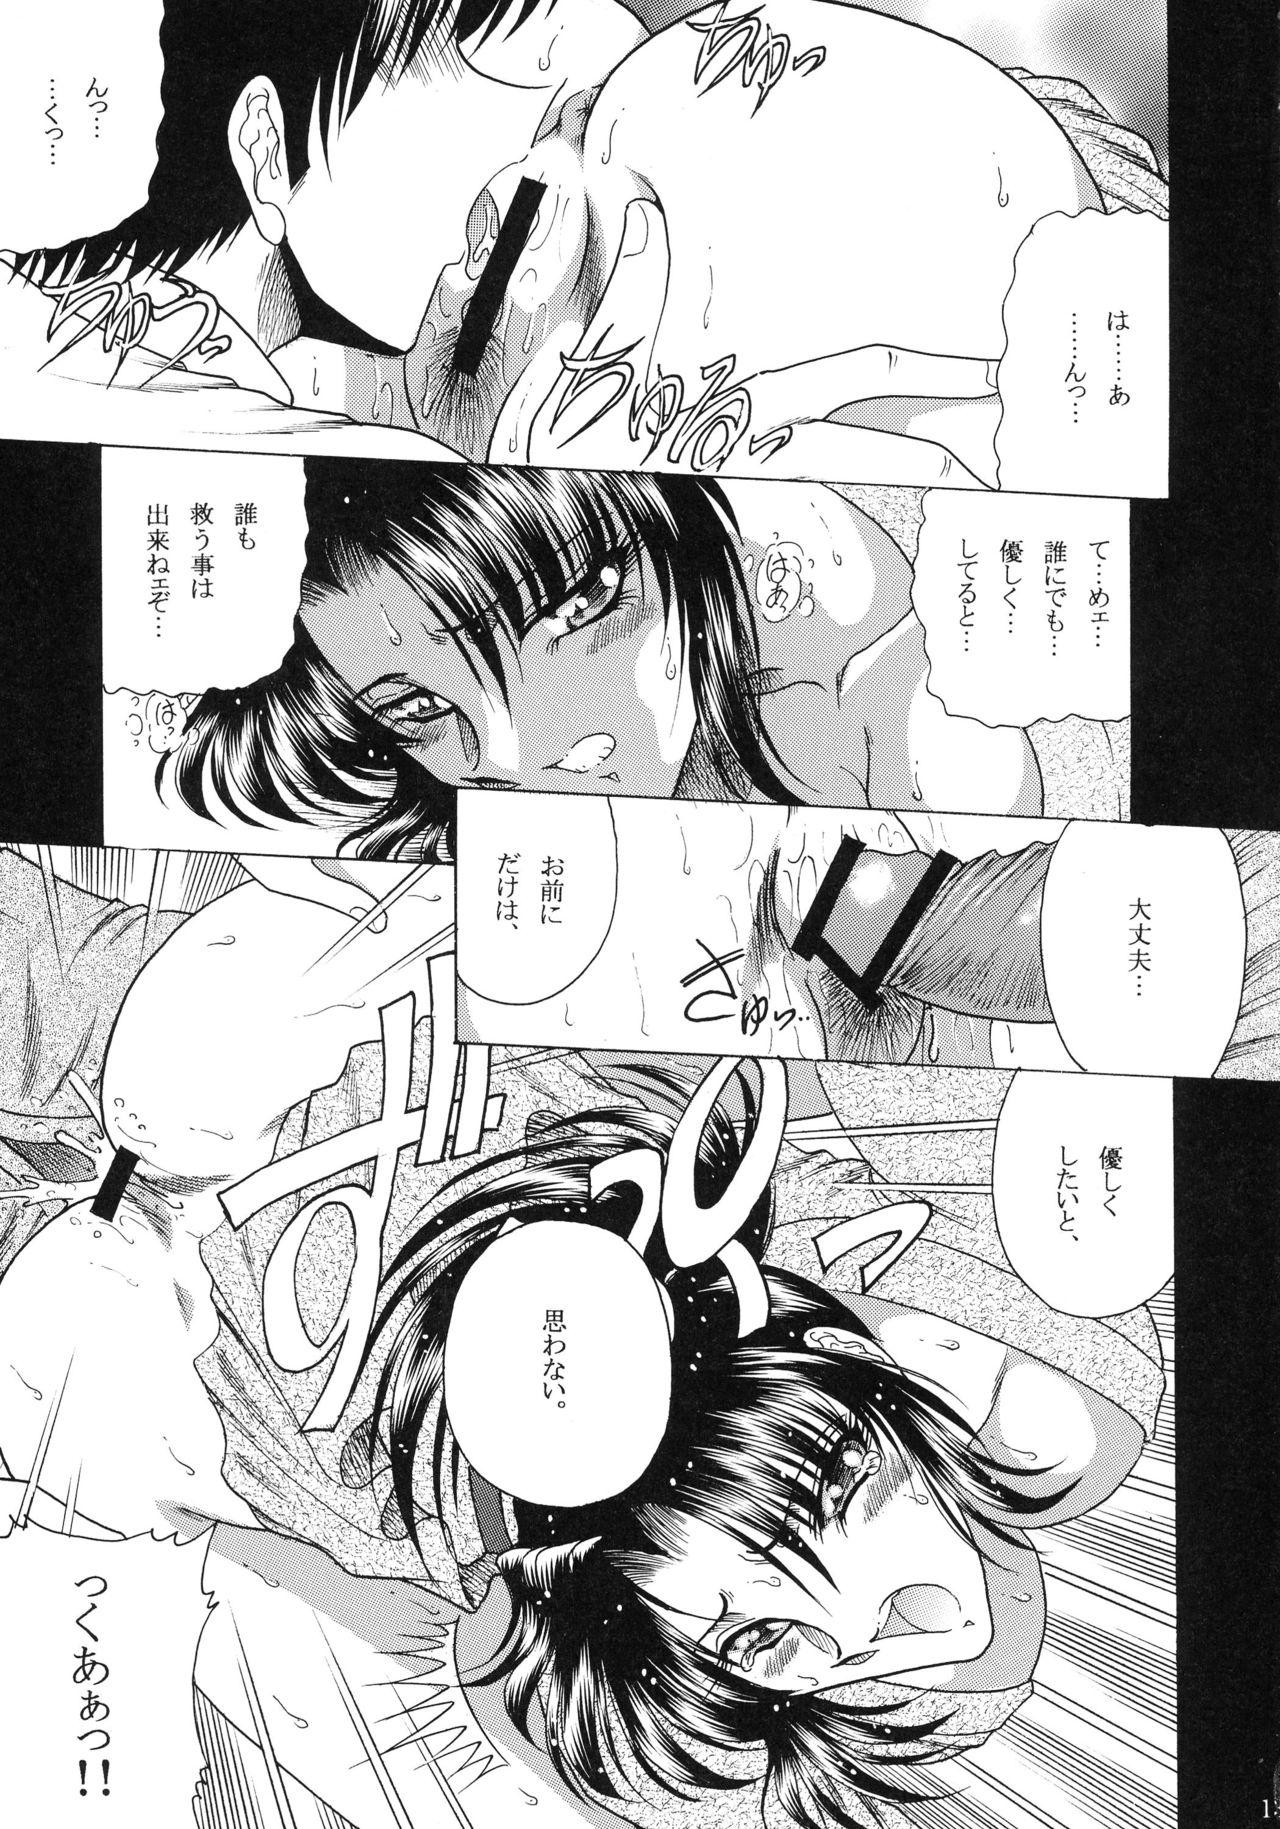 Blowjob ZONE 38 China Syndrome - Black lagoon Speculum - Page 12